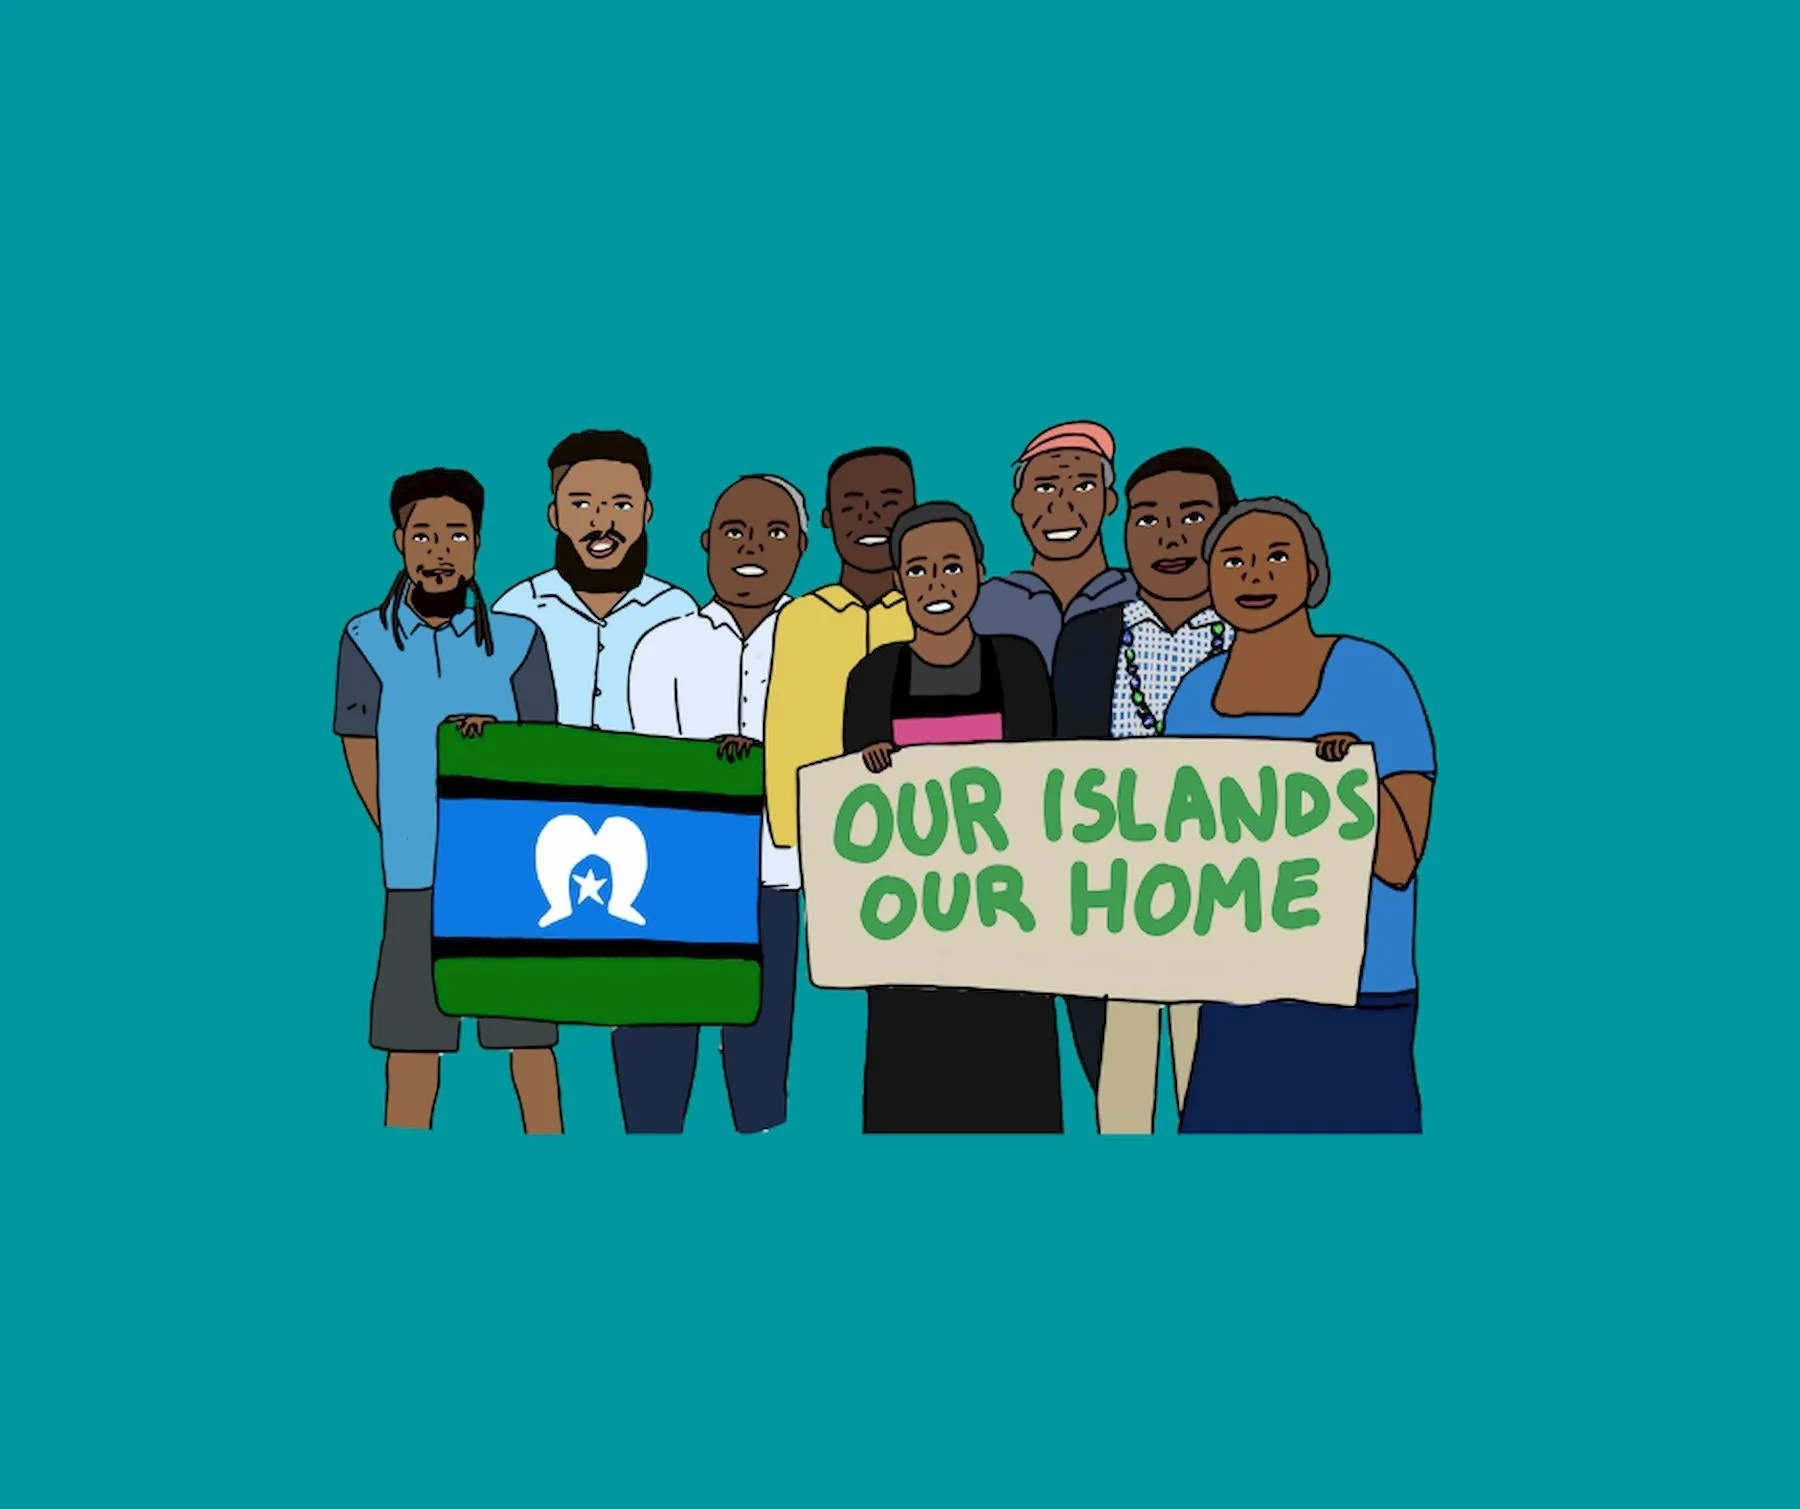 Cartoon of 8 people holding a Torres Strait Islander flag and a sign reading "Our Islands Our Home"